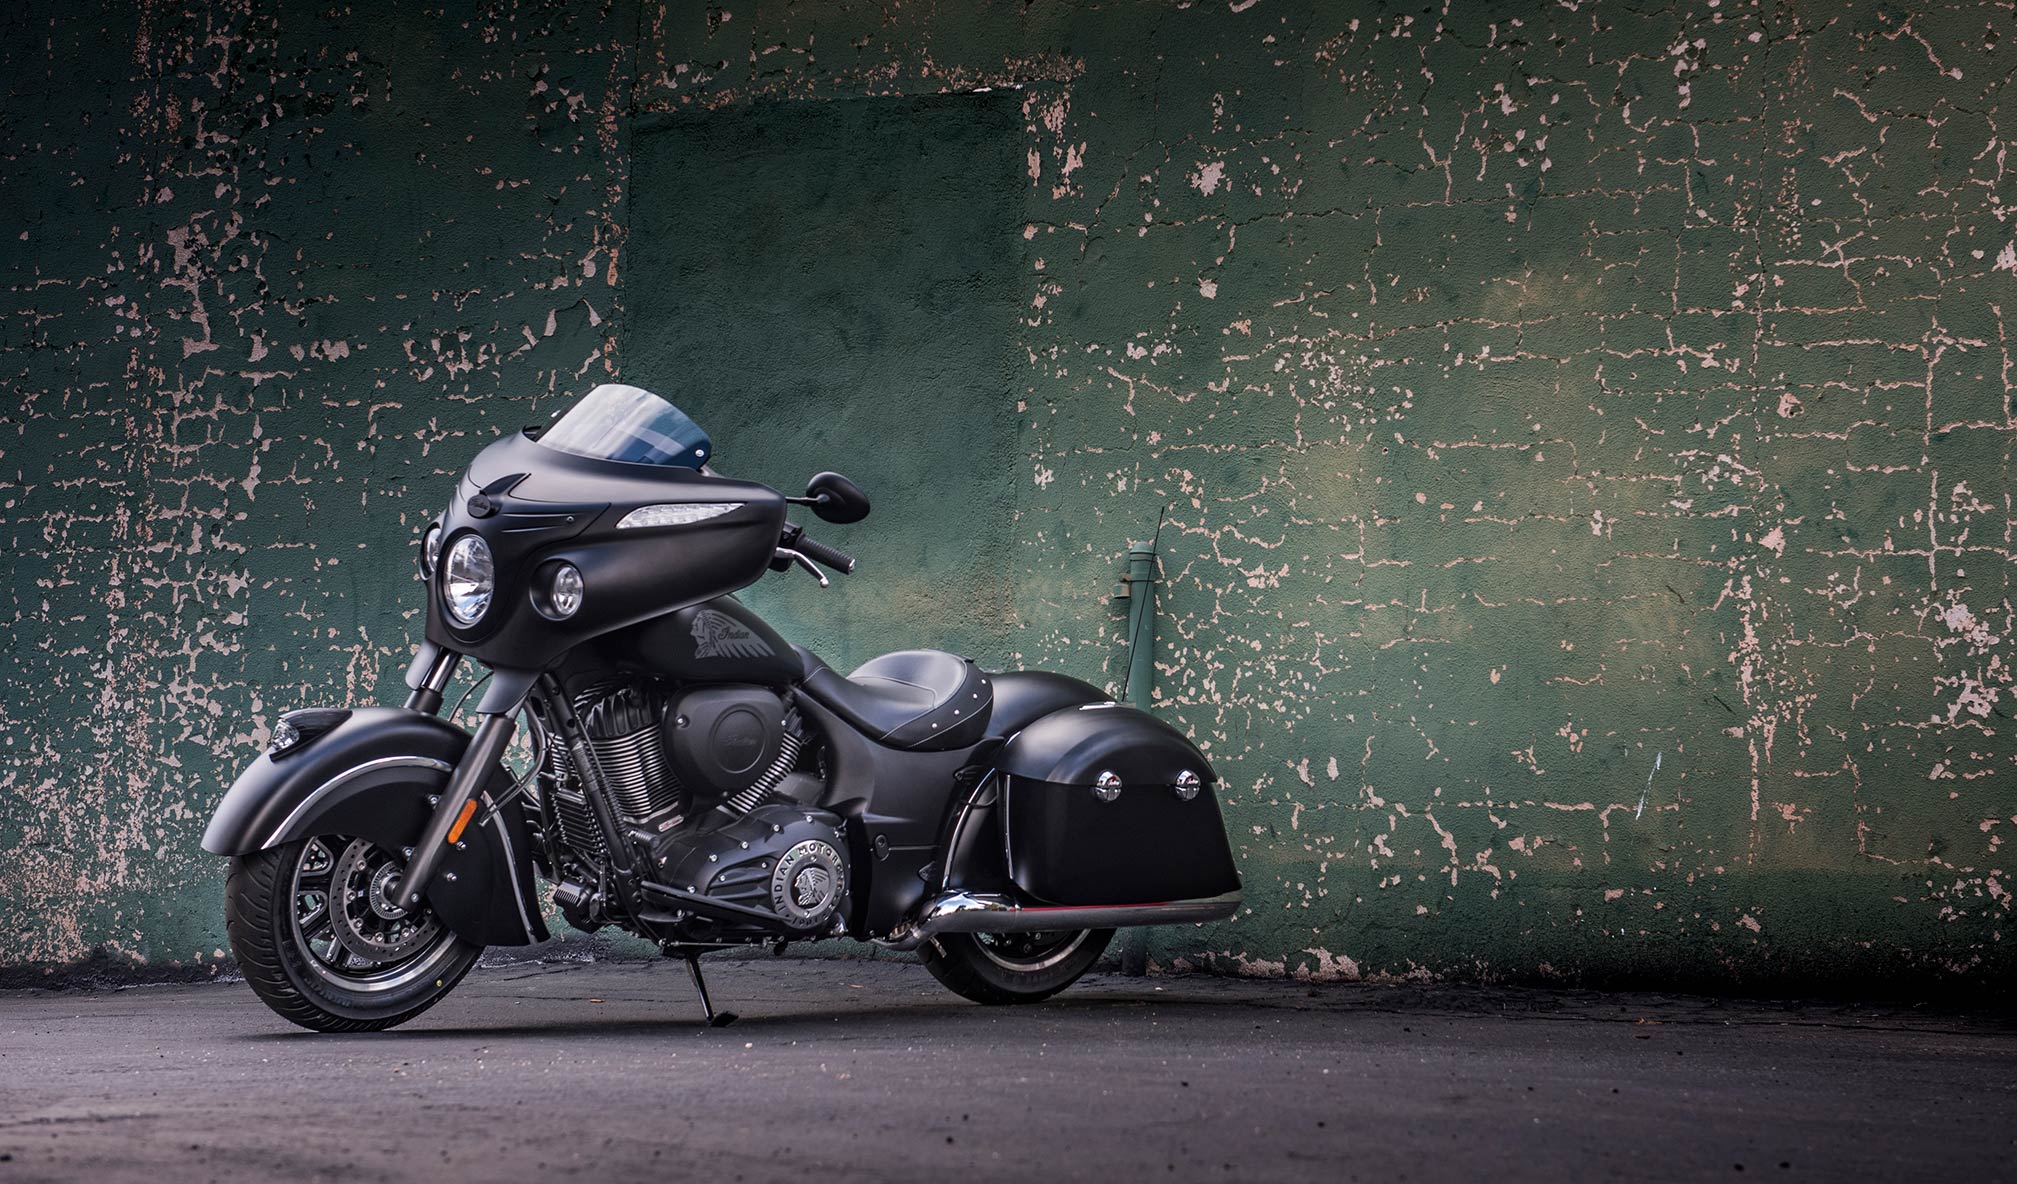 Indian Chieftain Dark Horse HD Wallpaper Background Image